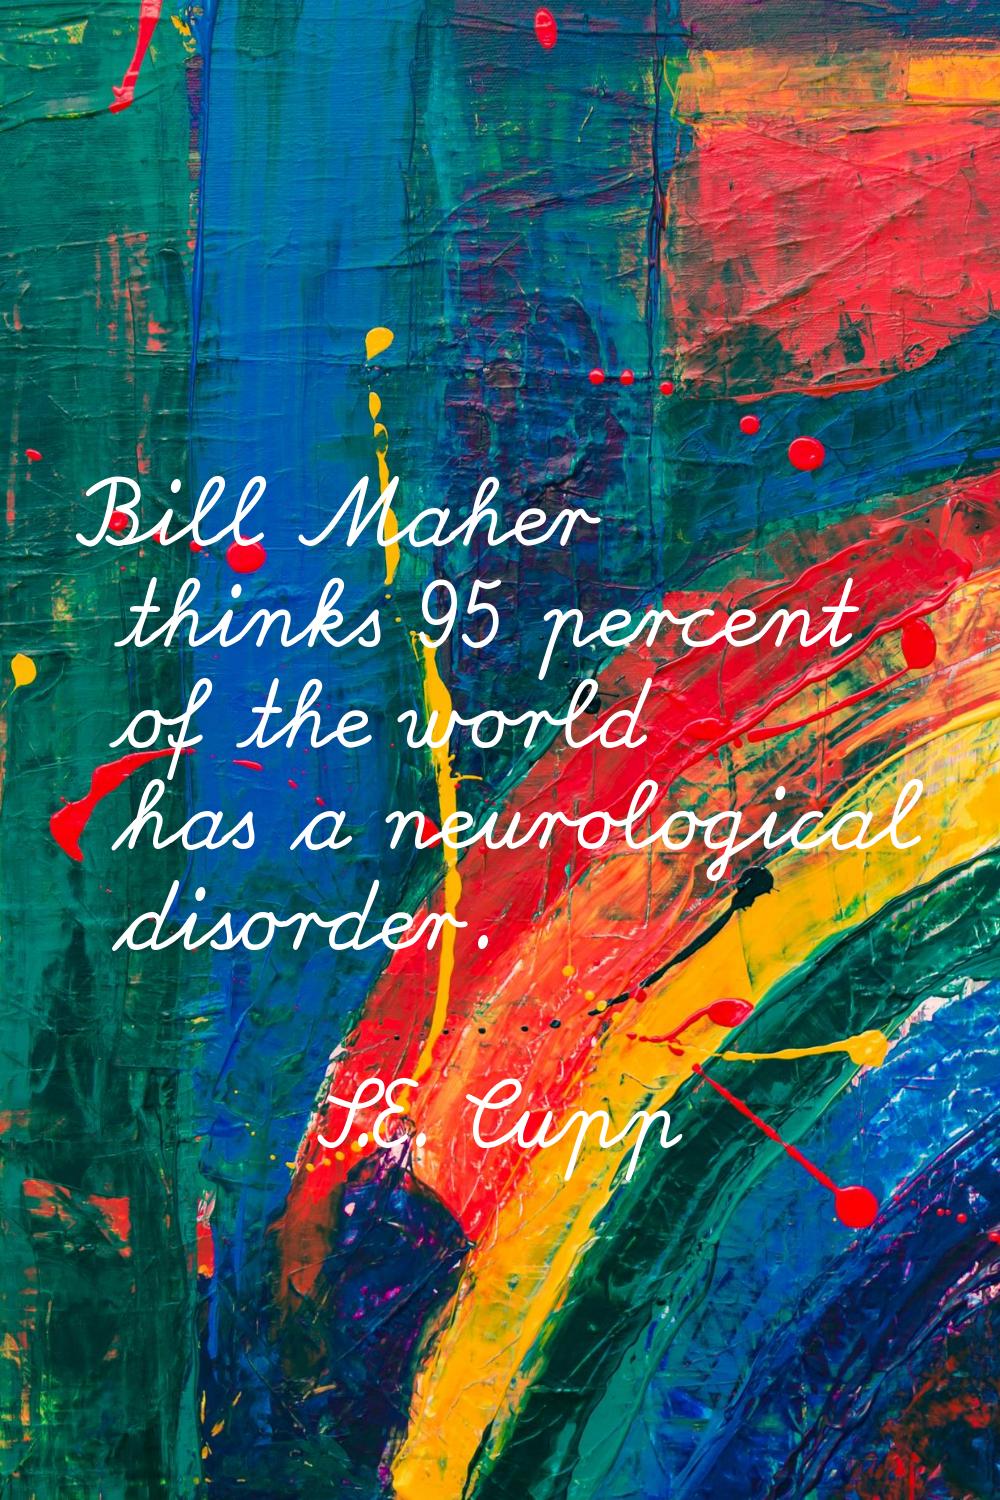 Bill Maher thinks 95 percent of the world has a neurological disorder.